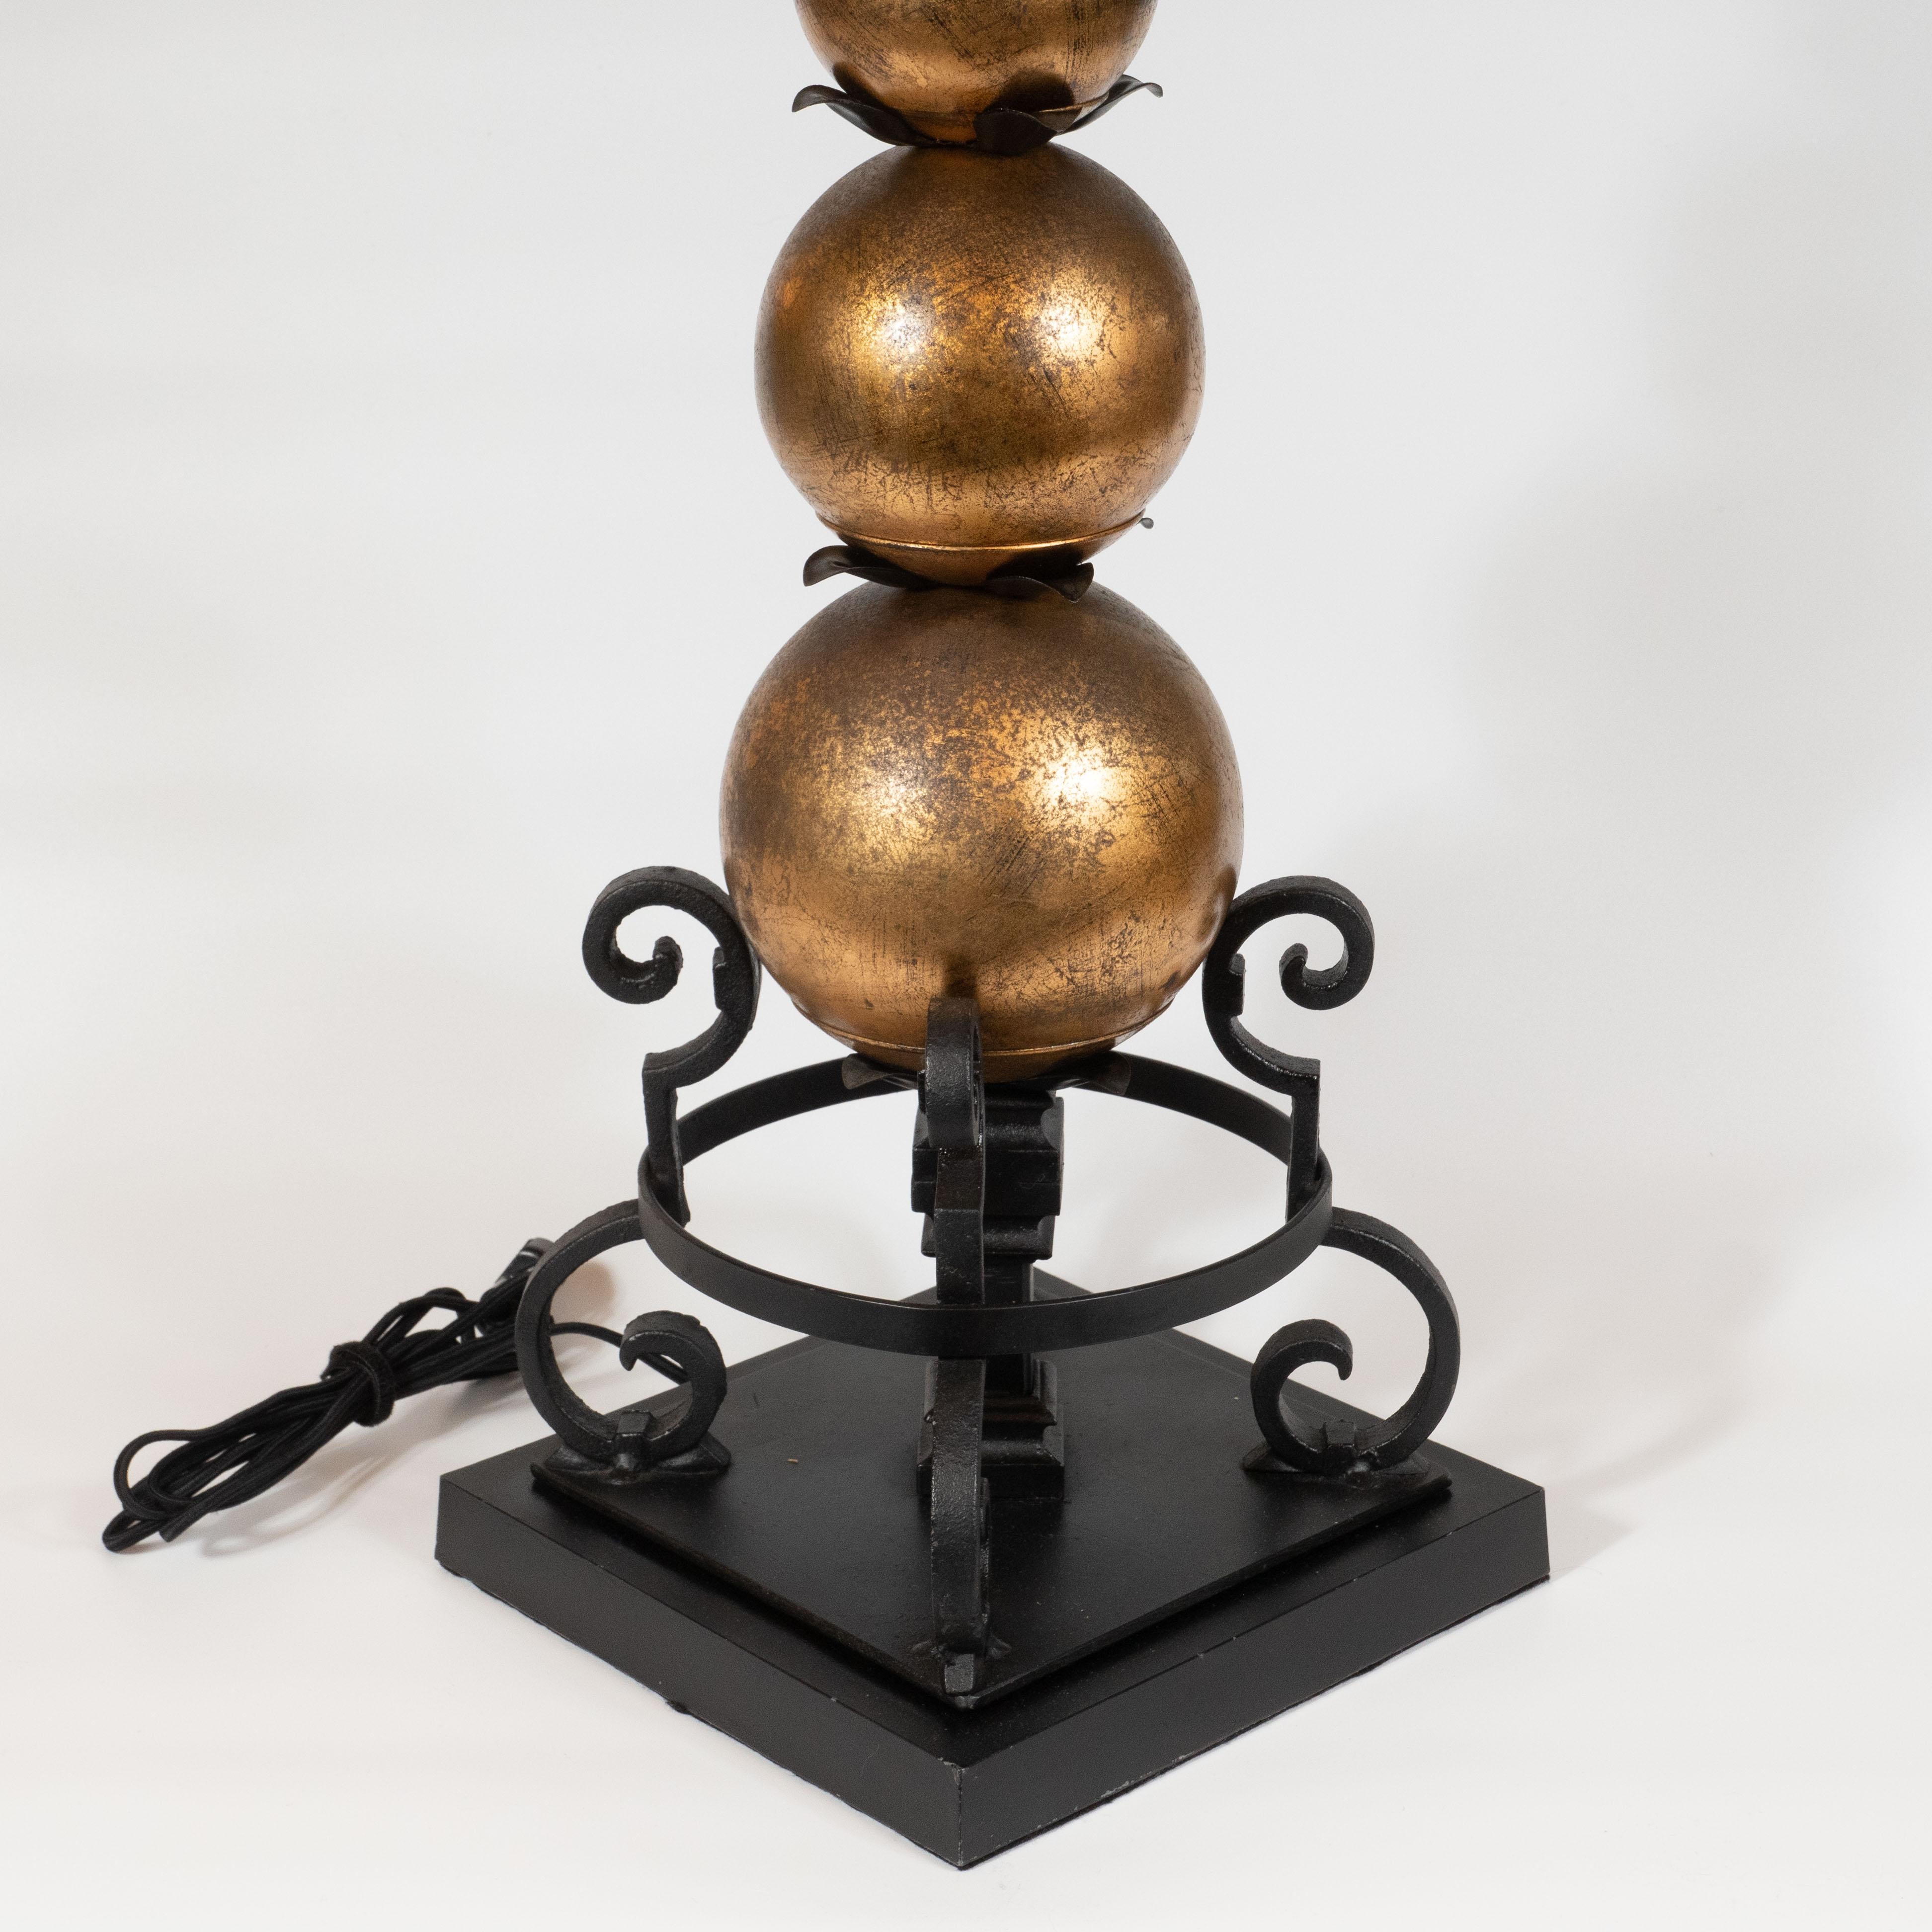 Pair of 1940s Gilded Spheres and Wrought Iron Spherical Art Moderne Table Lamps For Sale 3